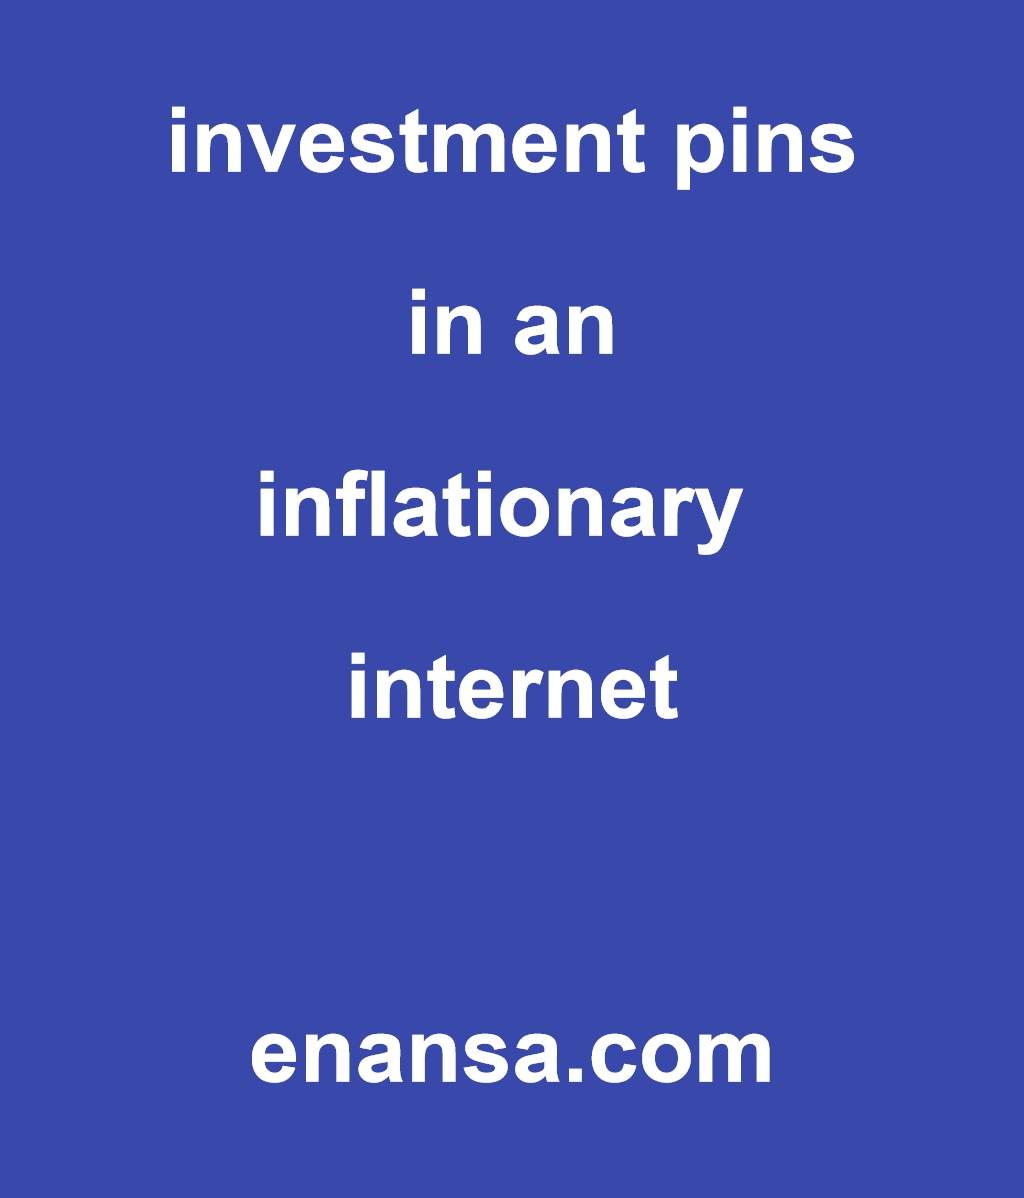 investment pins in an inflationary internet